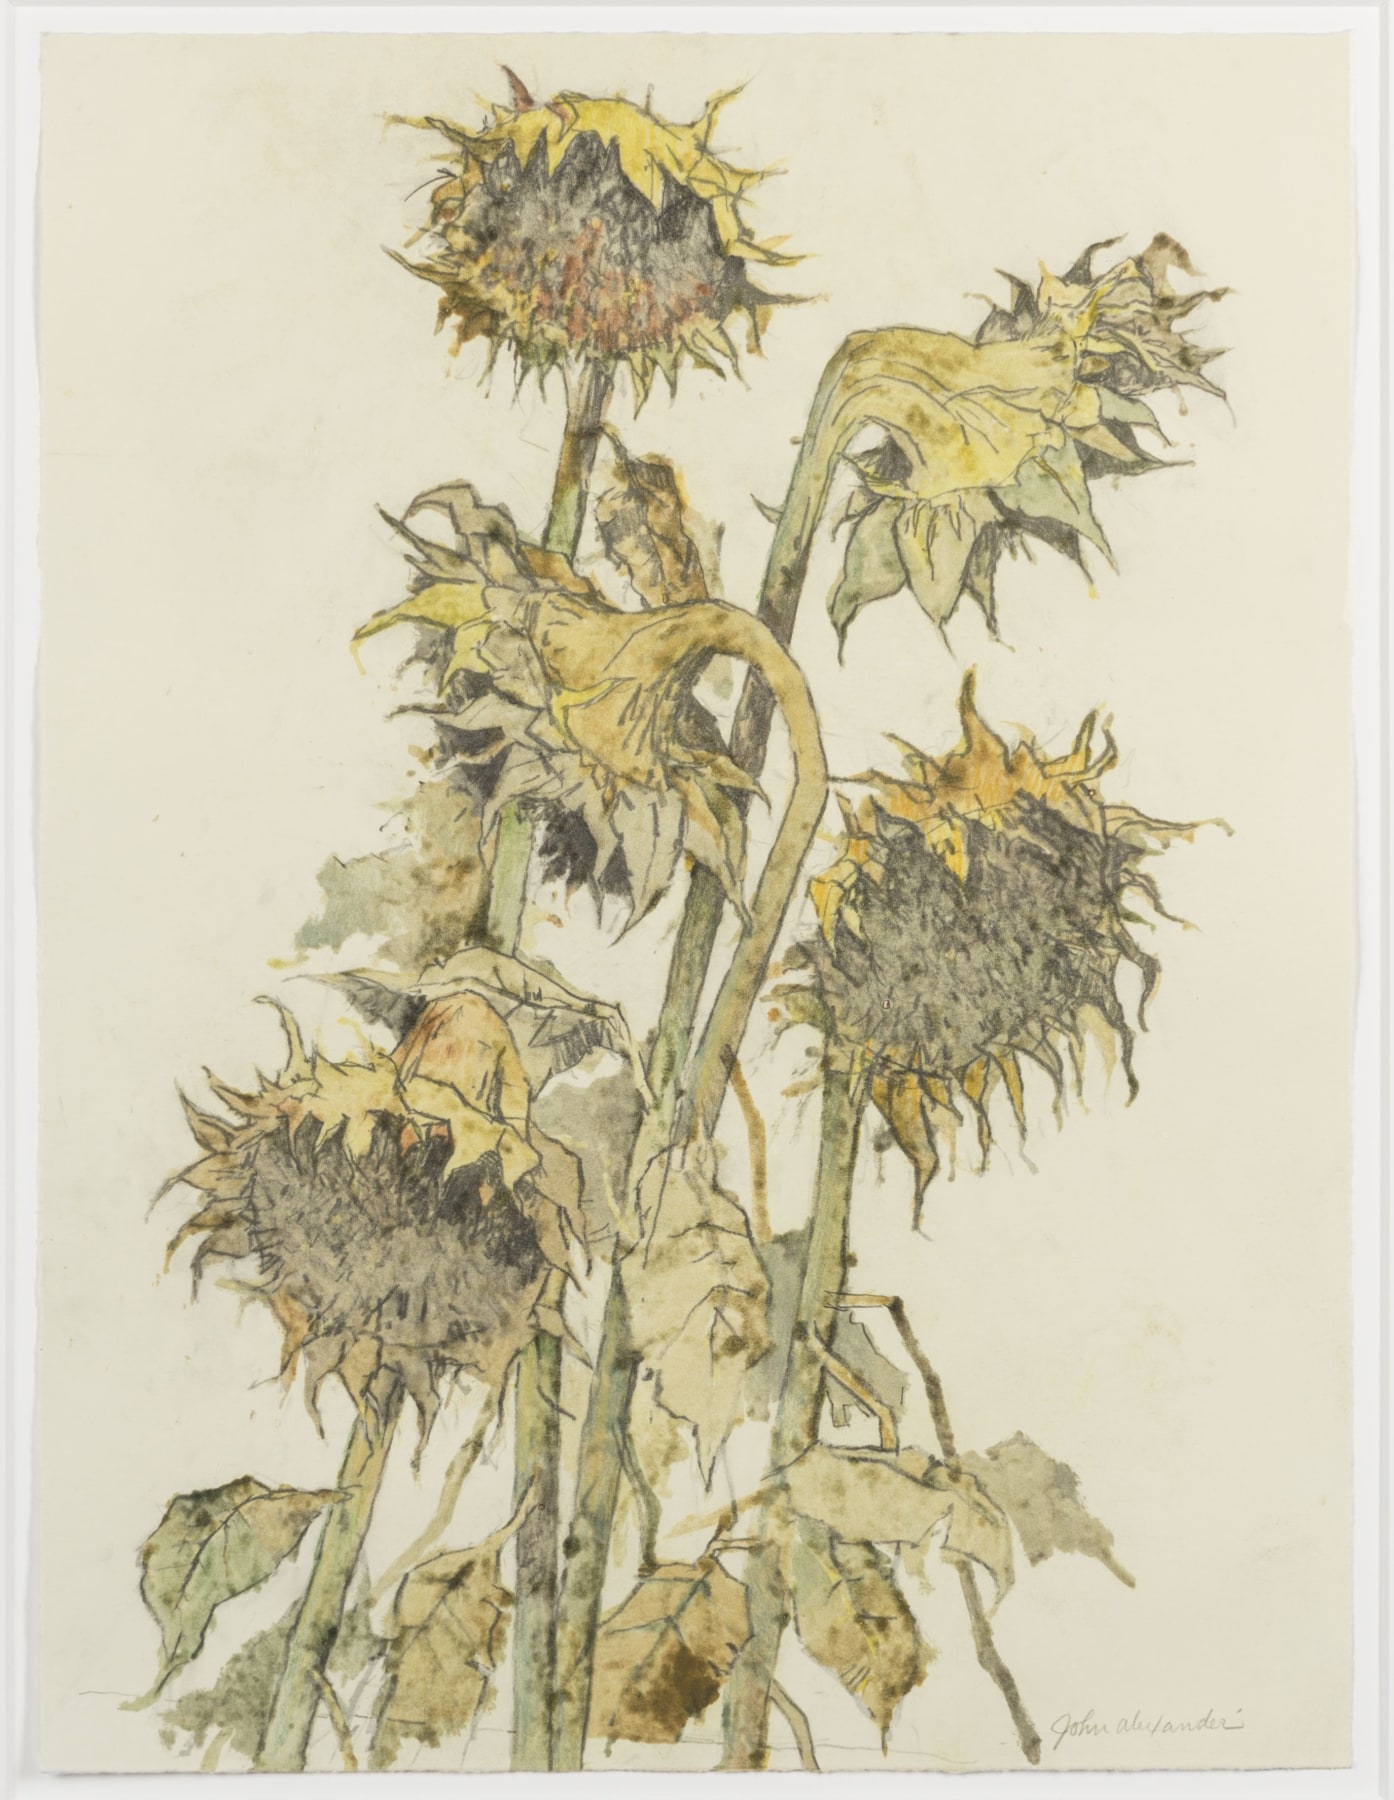 John Alexander  Sunflowers, Light Autumn, 2012  monotype from steel and aluminum plates with hand-coloring  Framed: 31 x 25.25 inches  Paper: 23 x 17.75 inches  Inquire